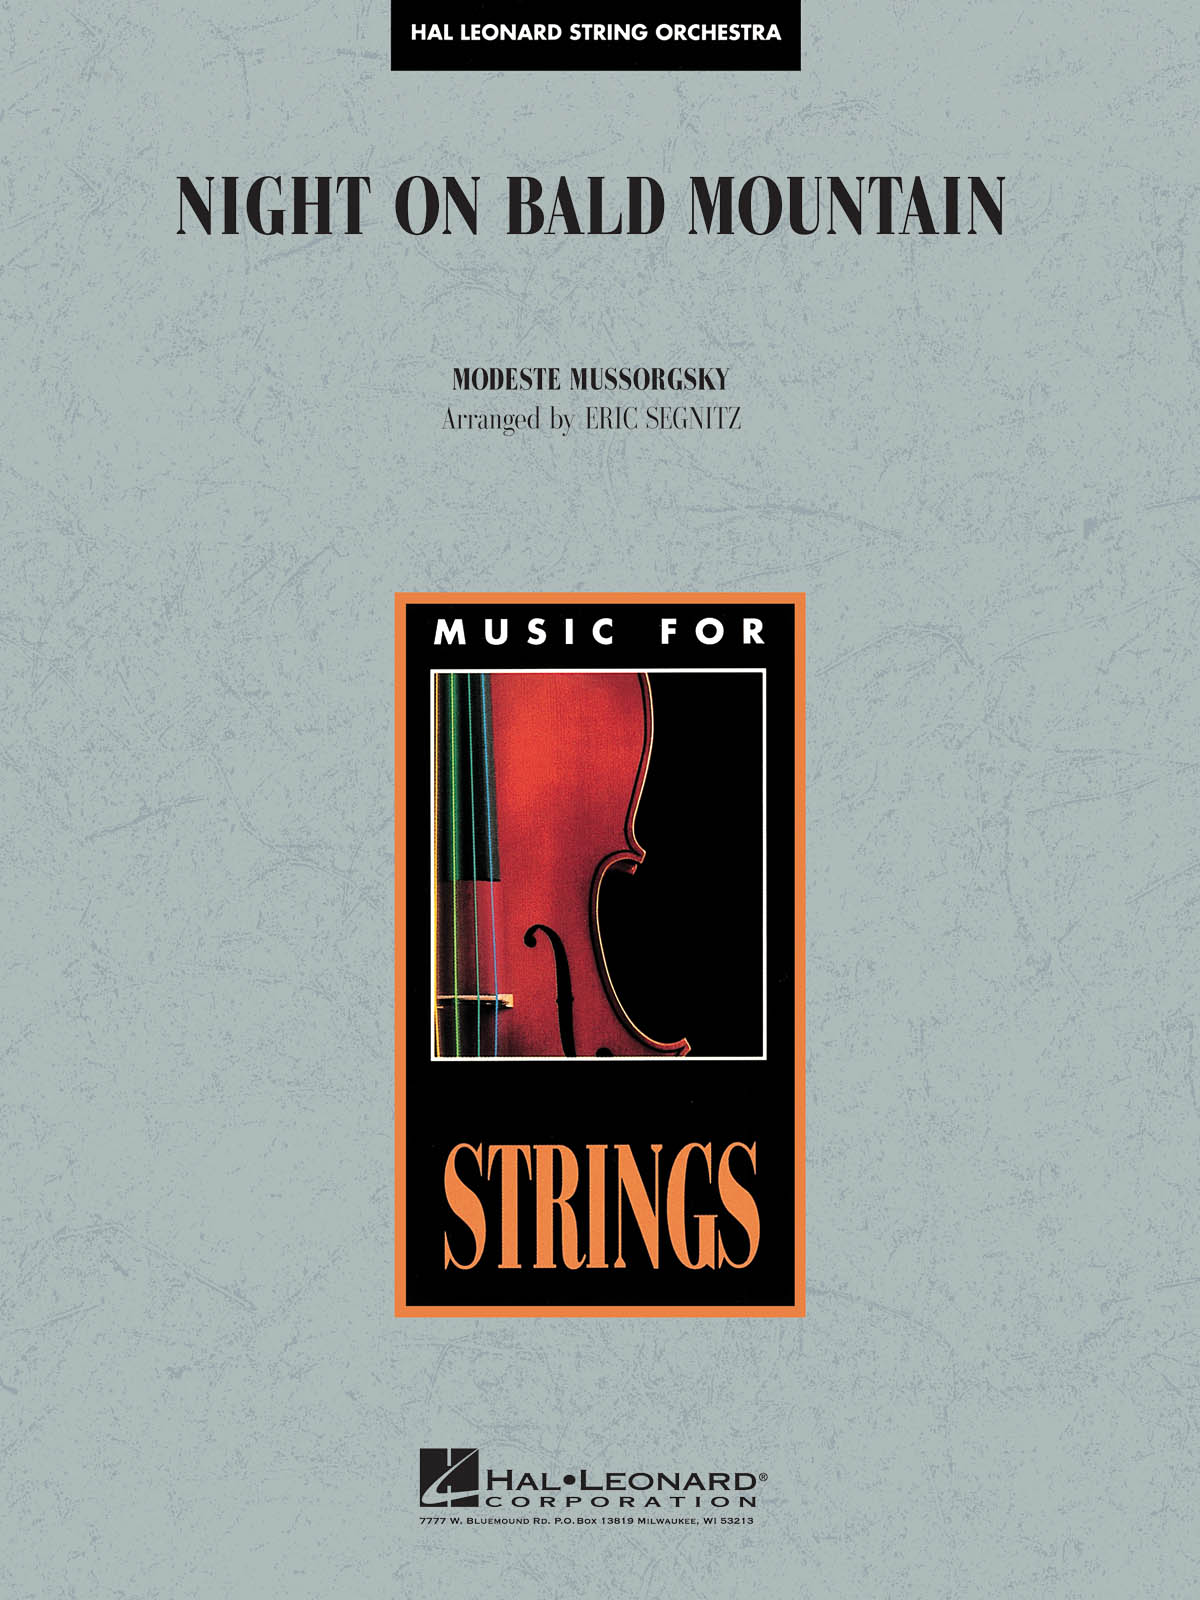 Modest Mussorgsky: Night on Bald Mountain: String Orchestra: Score